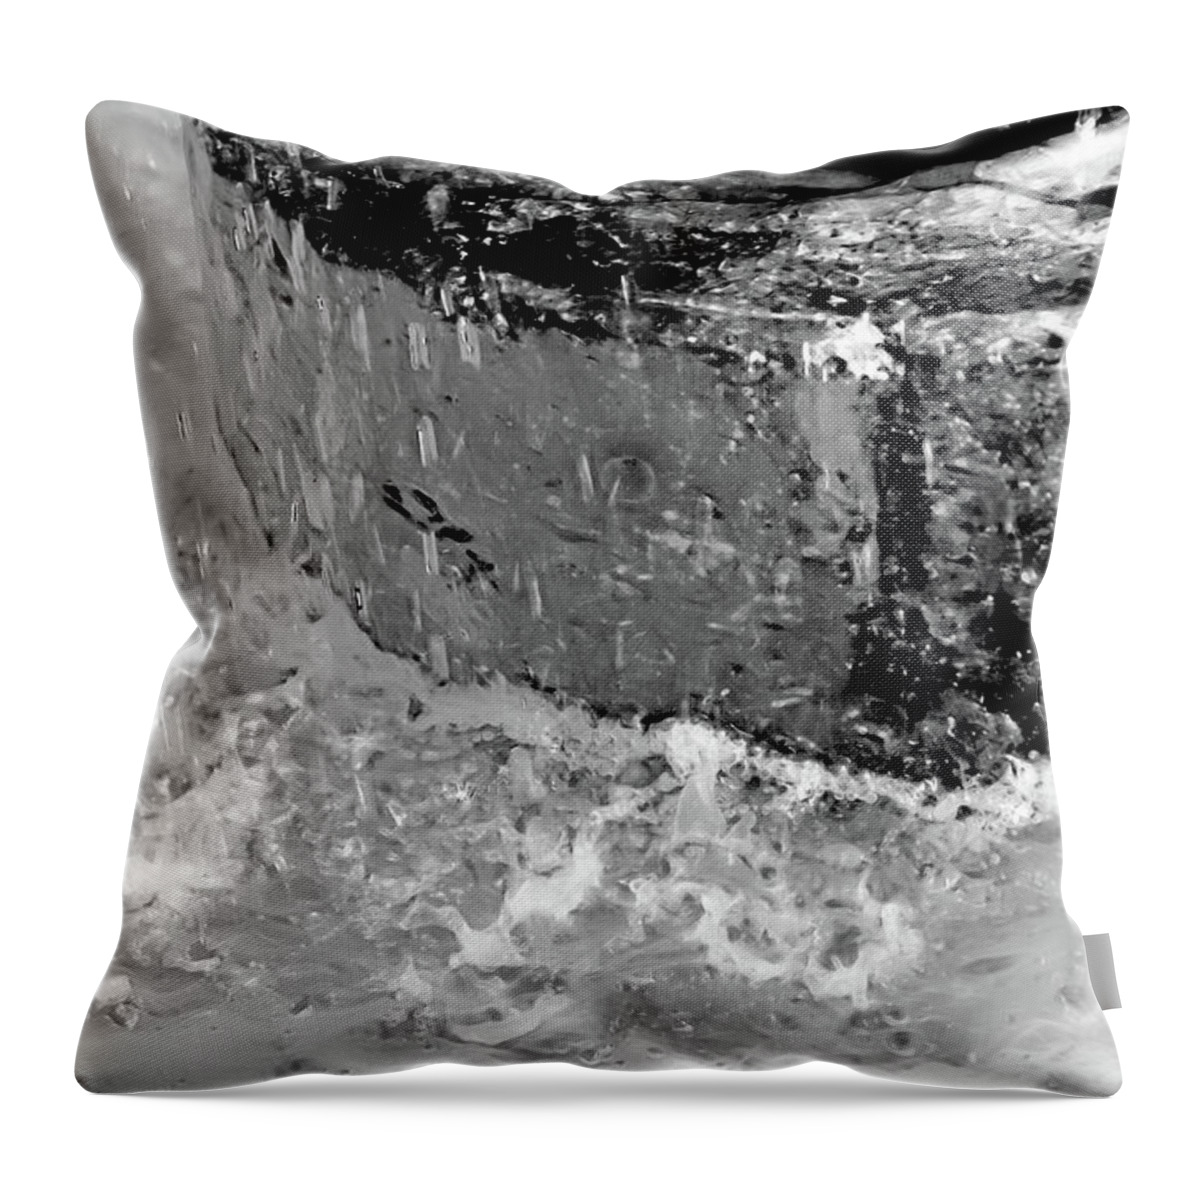 Water Drops Throw Pillow featuring the photograph Fountain Water Drops by Gina O'Brien